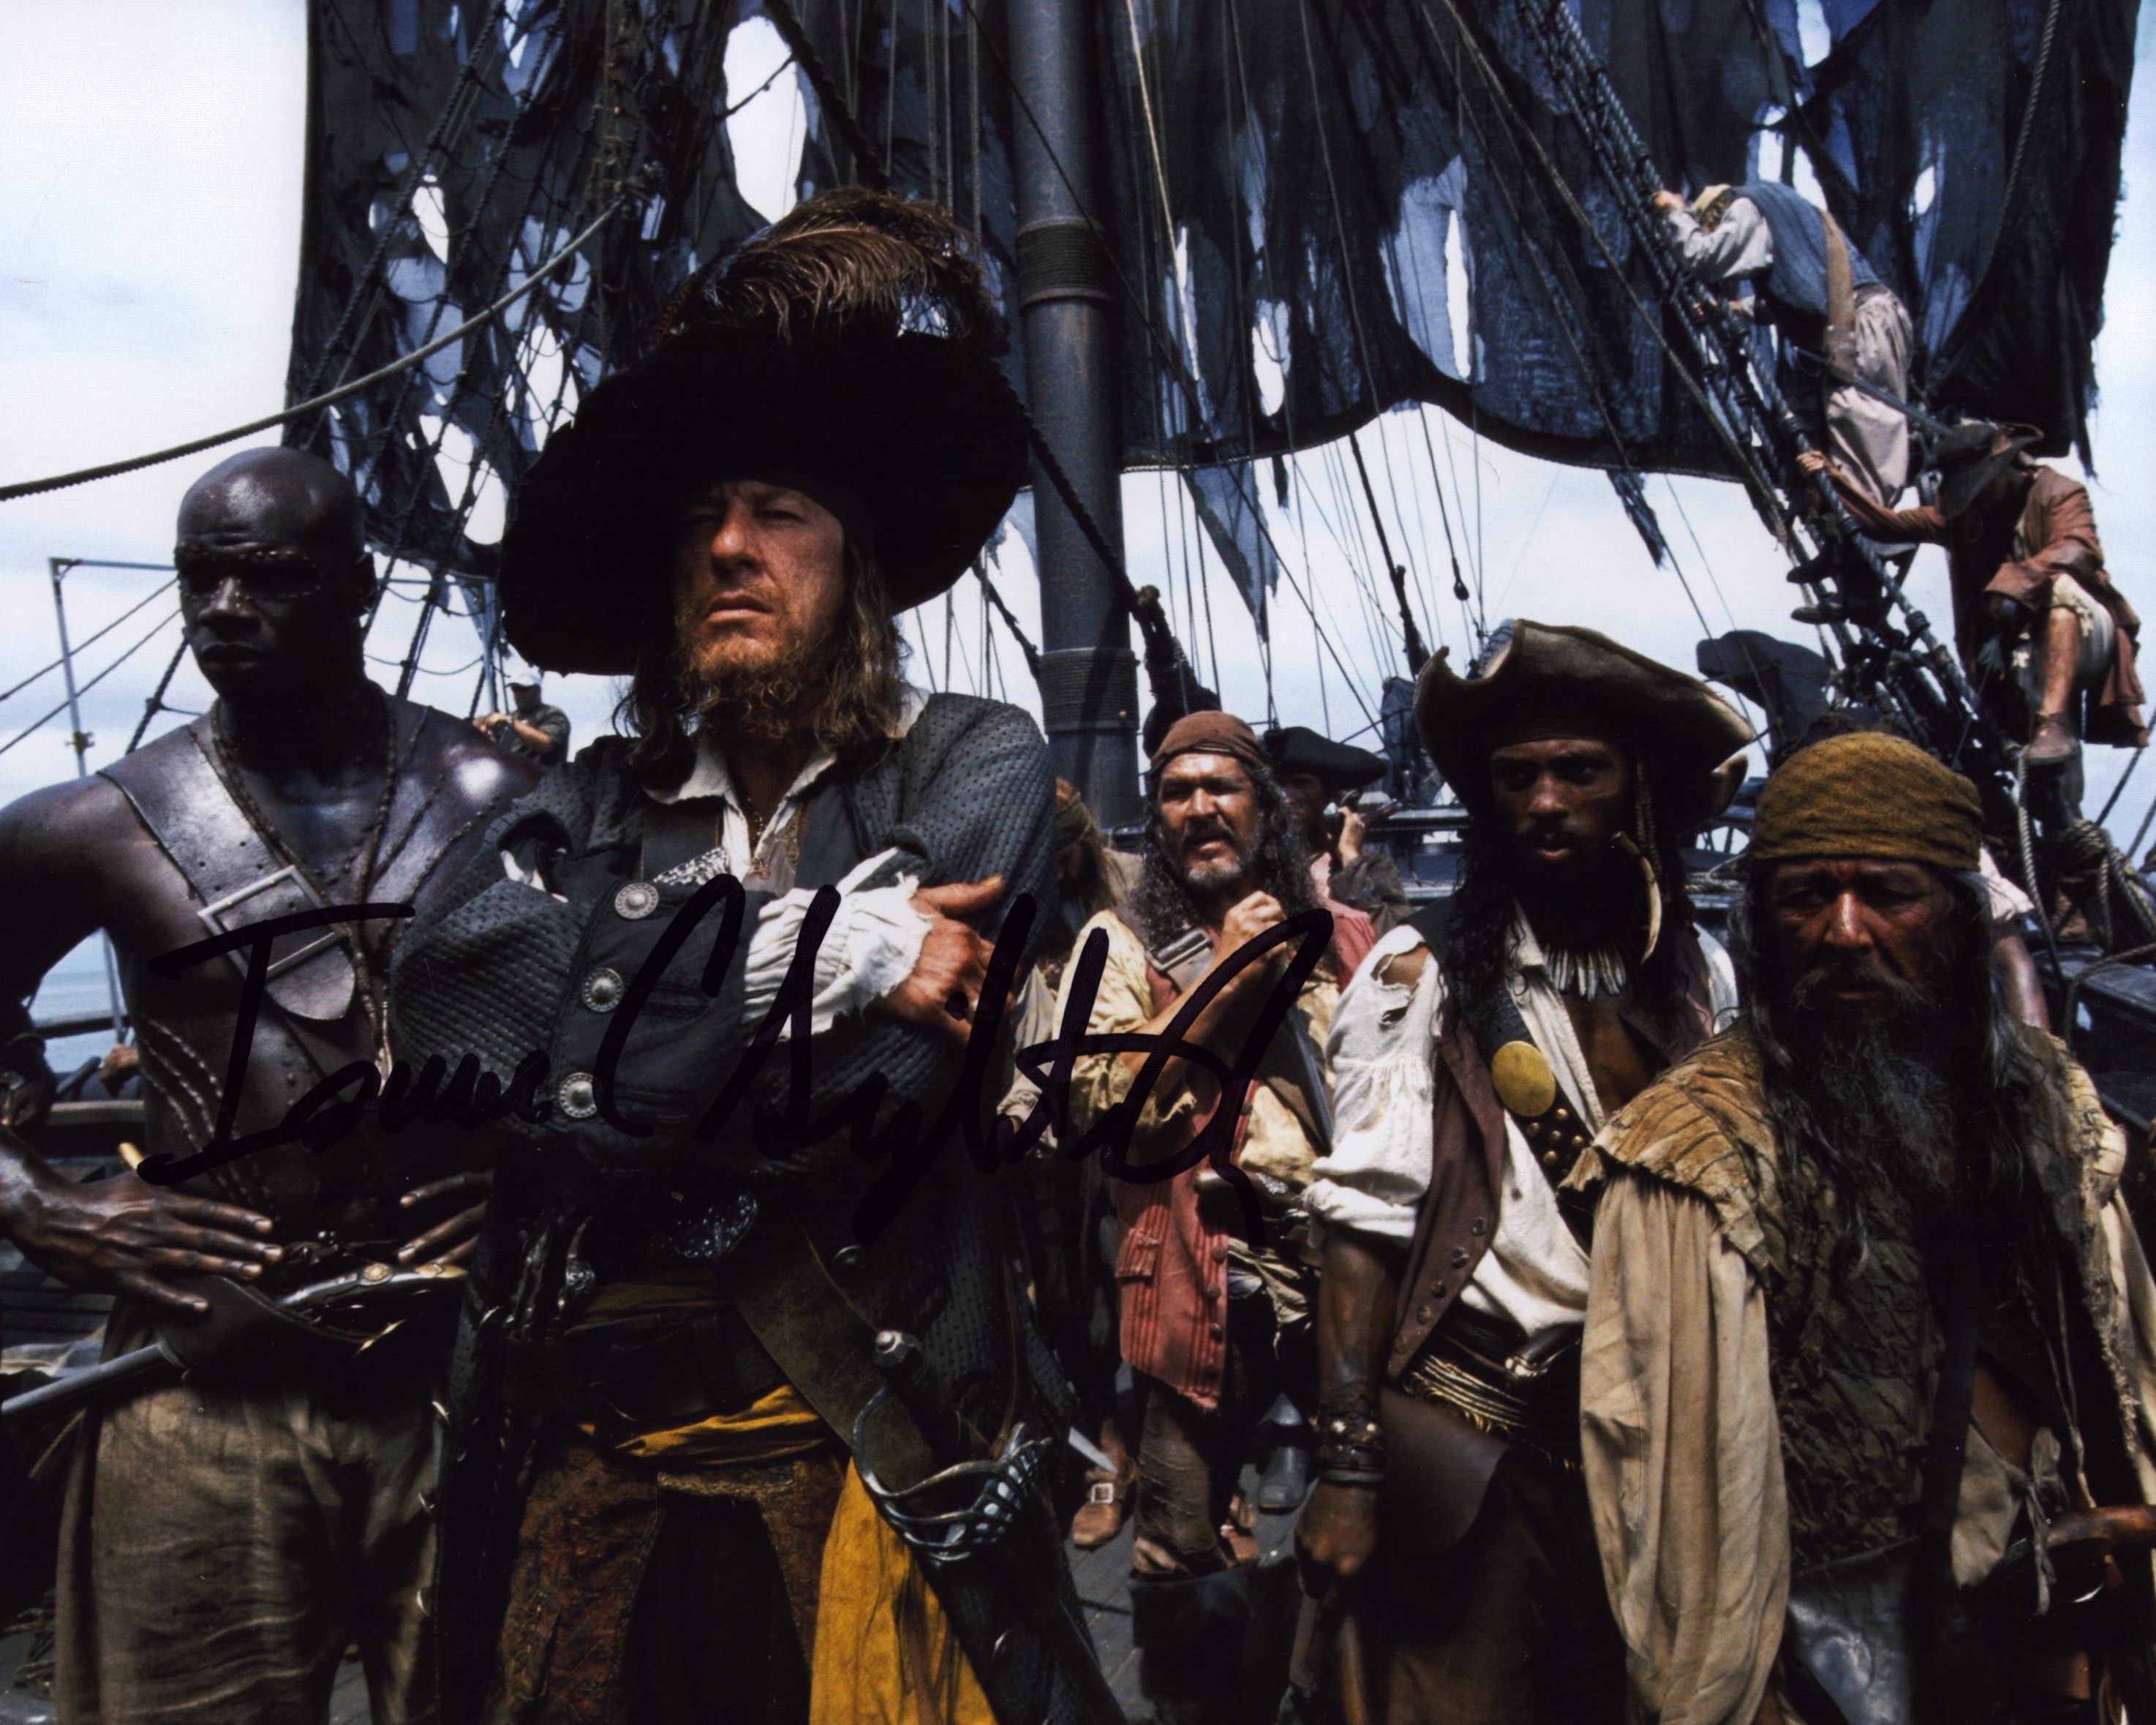 Pirates of the Caribbean Bosun Isaac J Singleton signed super 10 x 8 colour photo from the movie,